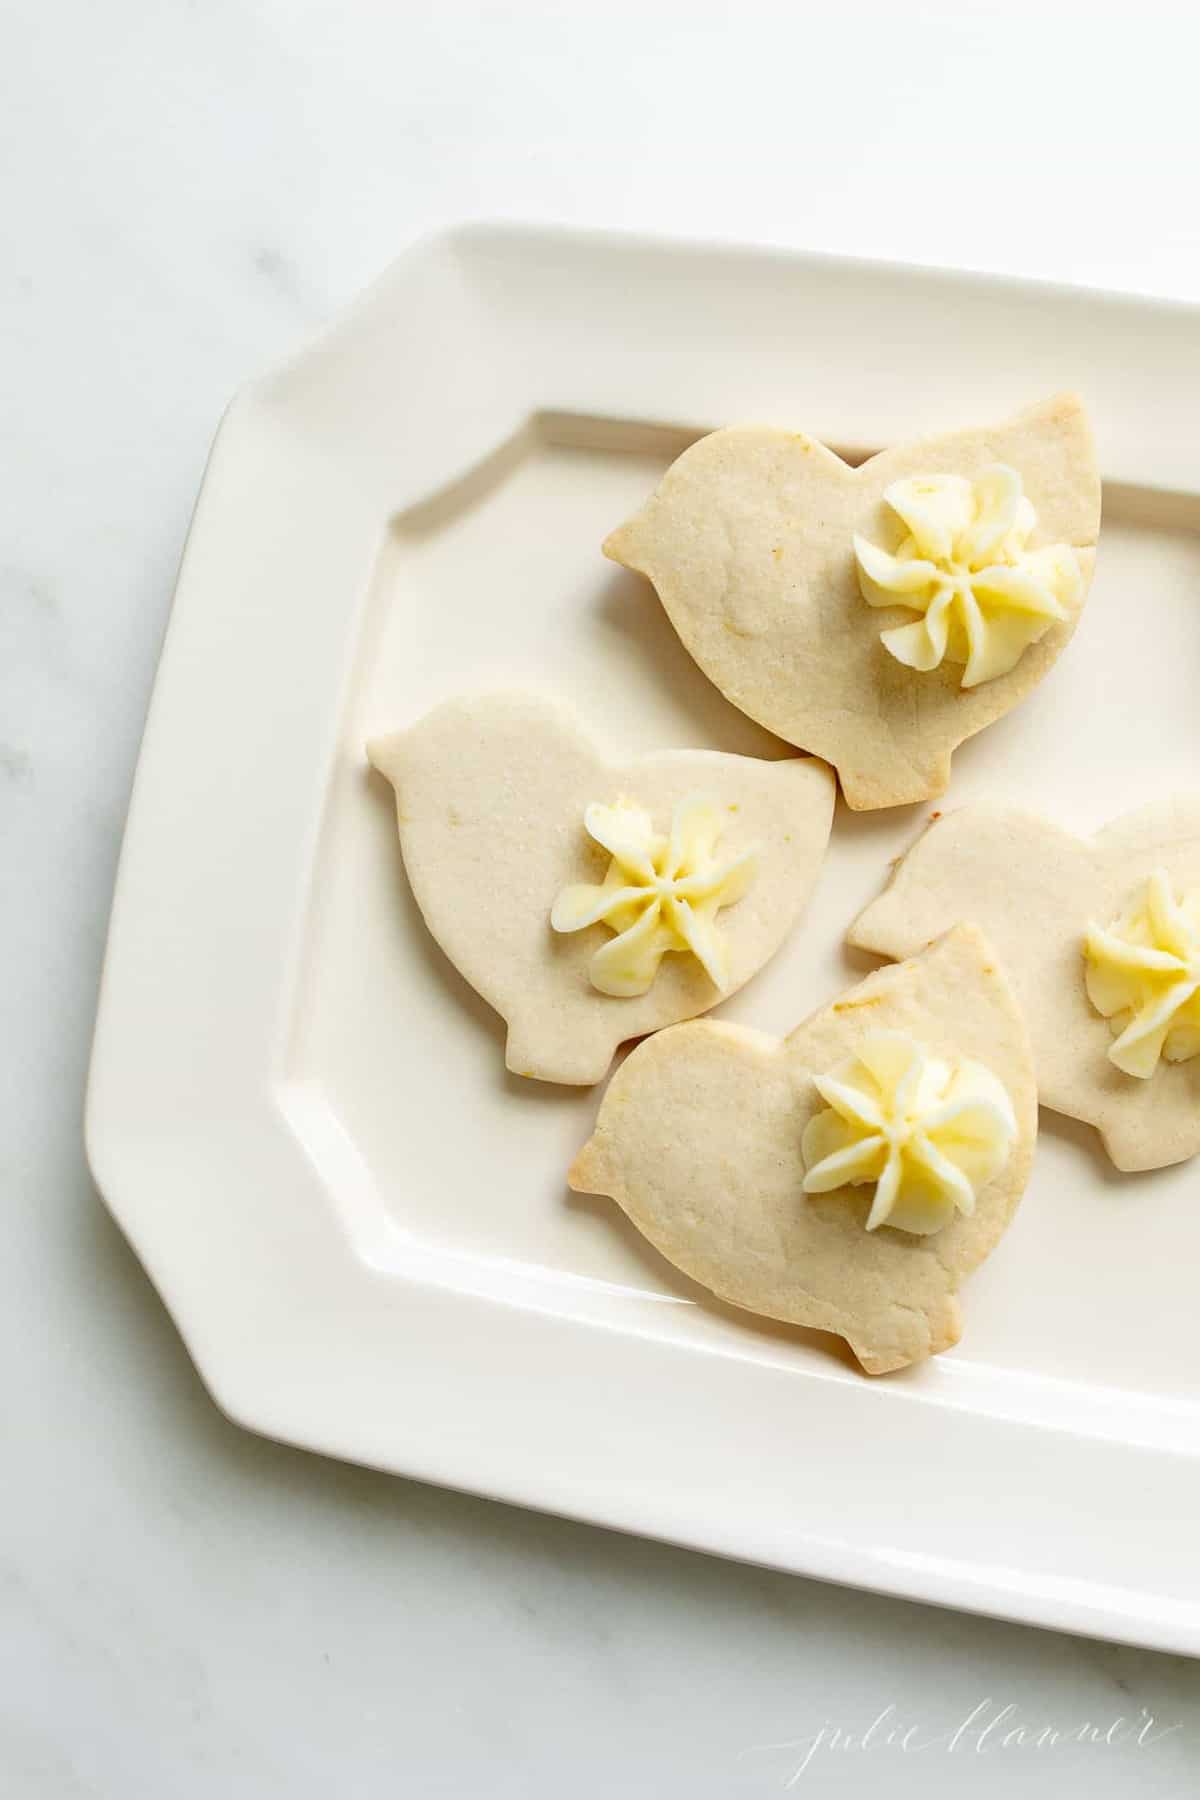 A white platter with lemon frosted cookies cutout as ducks.